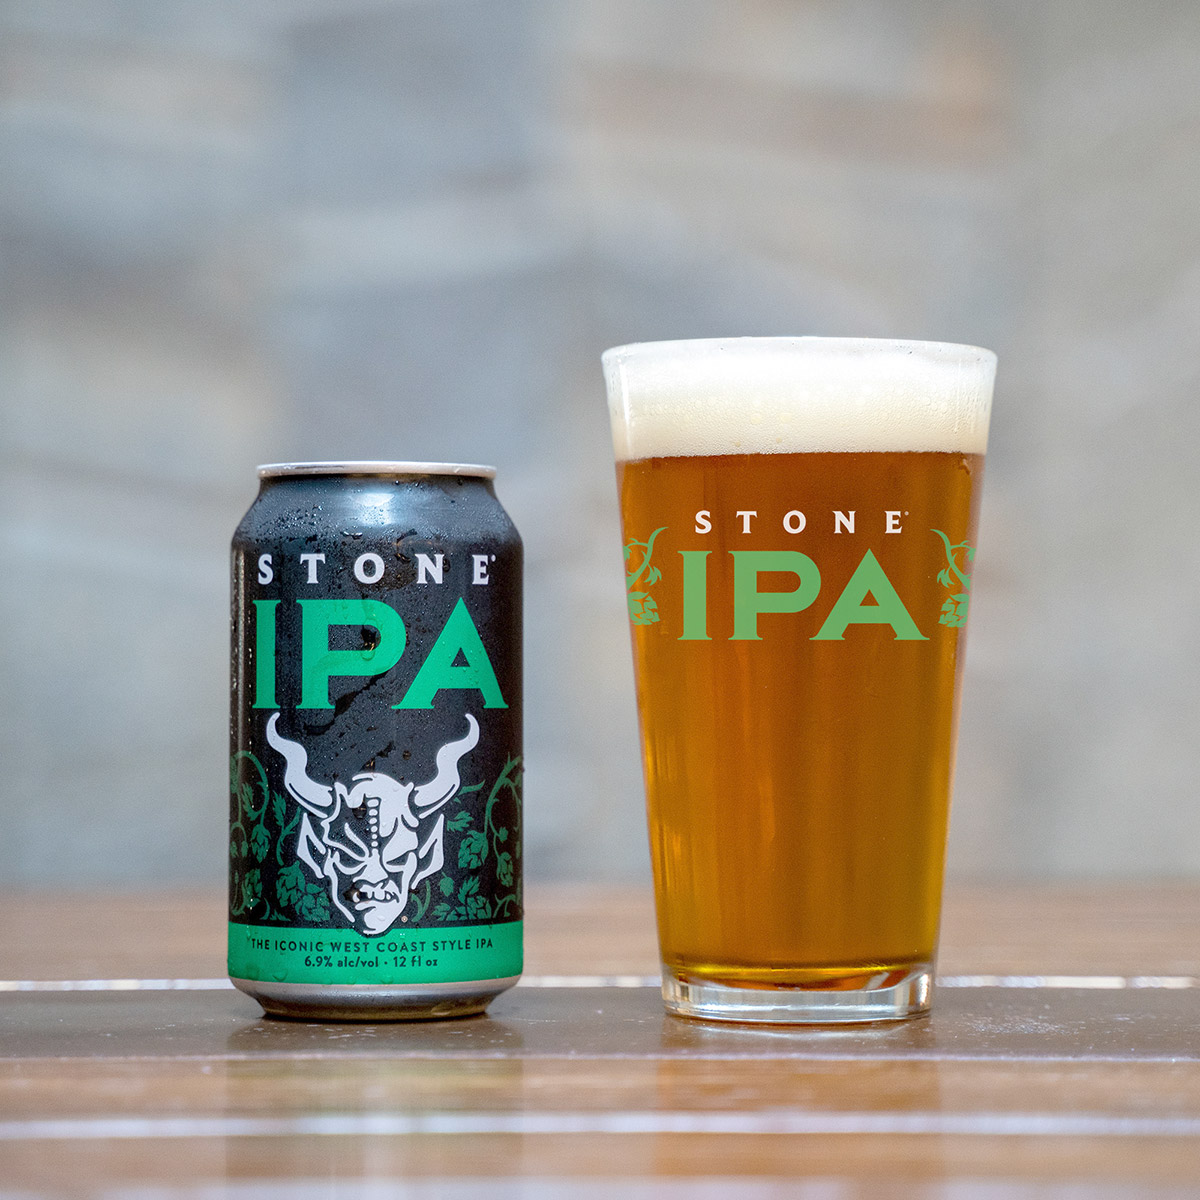 Stone IPA – Rated 96 Stone Brewing Co.